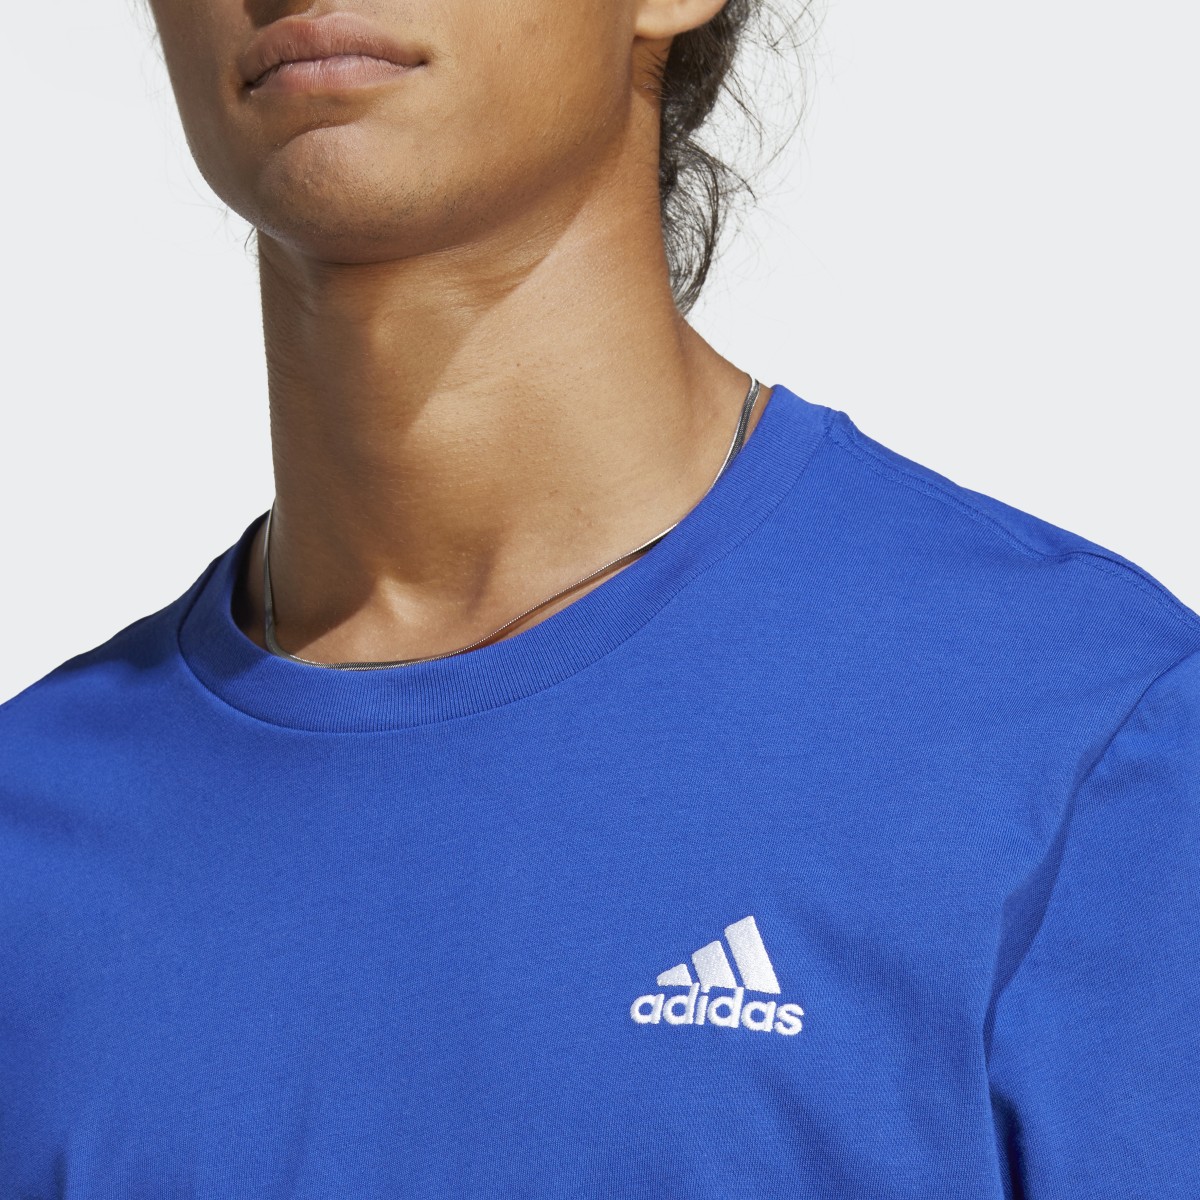 Adidas Essentials Single Jersey Embroidered Small Logo Tee. 6